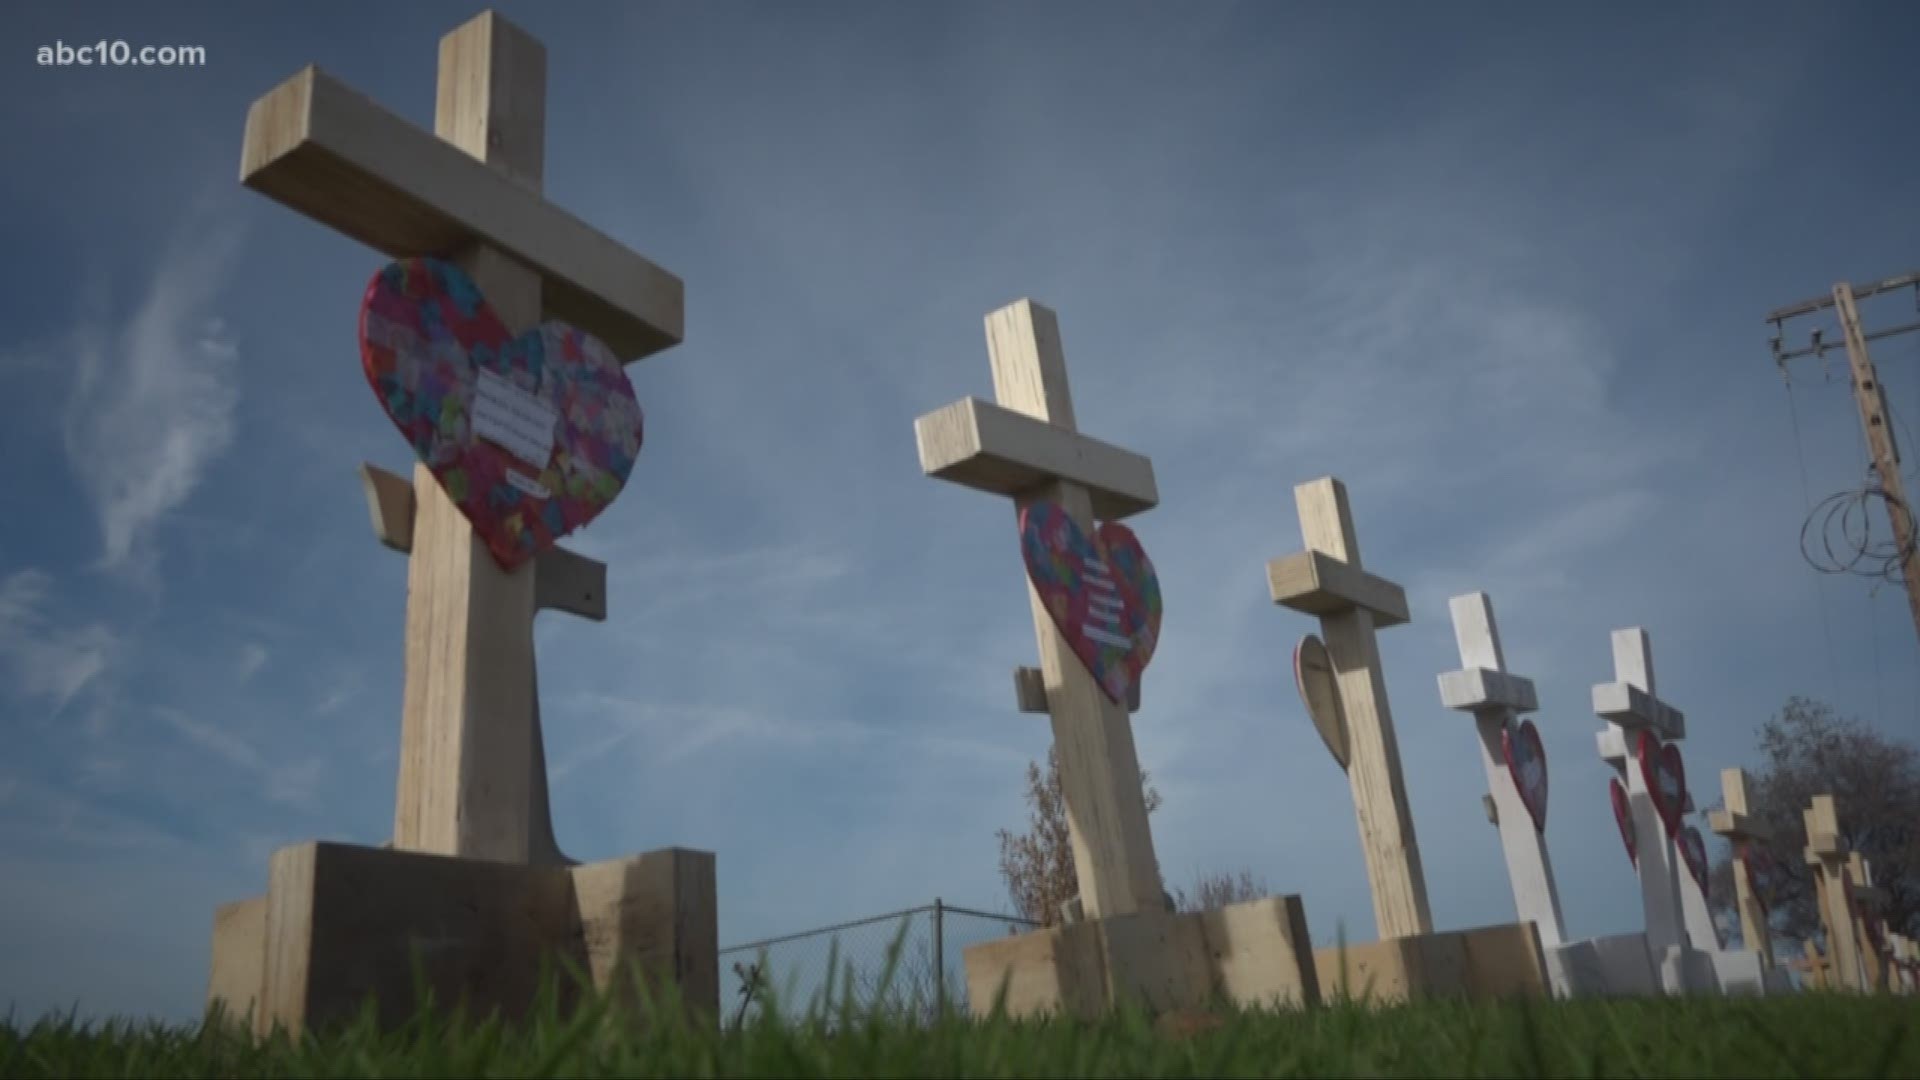 For more than two decades, Greg Zanis, Founder of Crosses for Losses, has been making wooden crosses to honor and remember victims of tragedies. Now he is in Paradise for the victims of the devastating Camp Fire.